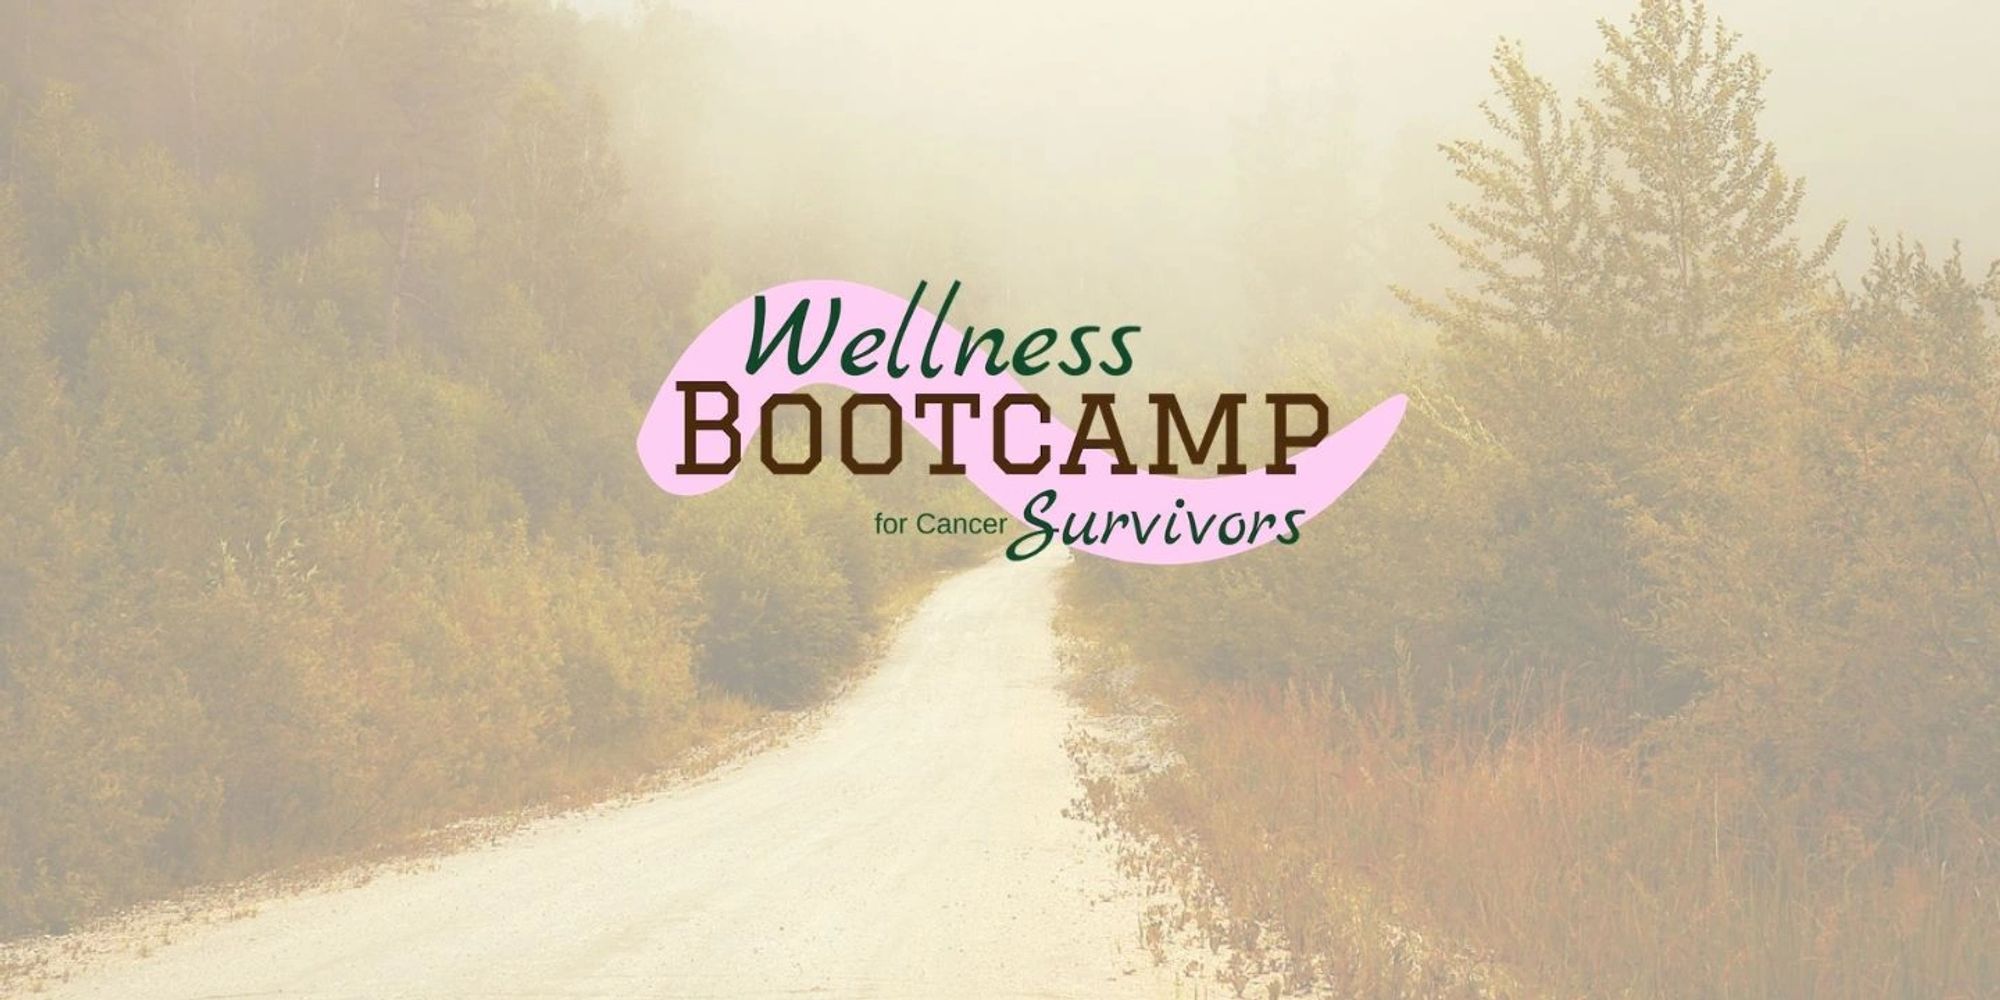 Wellness Bootcamp for Cancer Survivors - wellness is a journey.